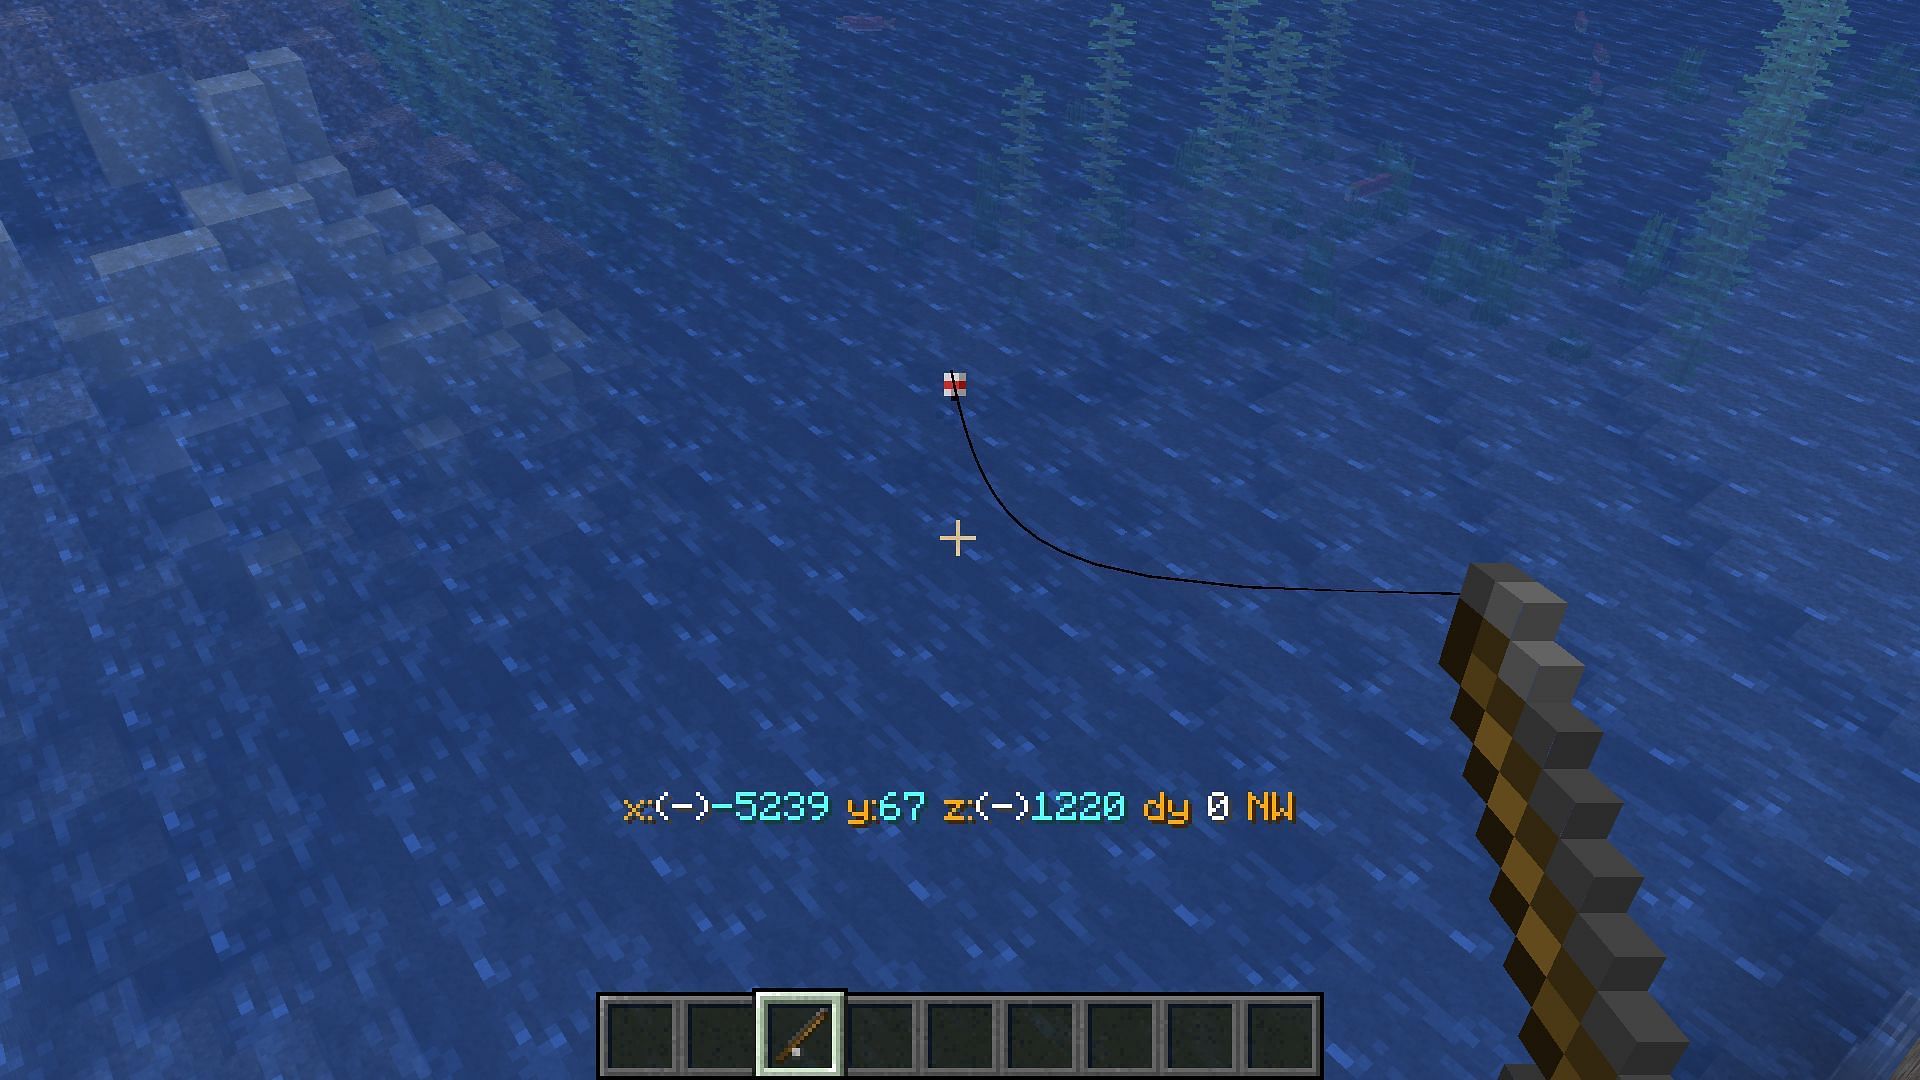 Fishing Rod can be used to obtain several items from water in Minecraft (Image via Mojang)